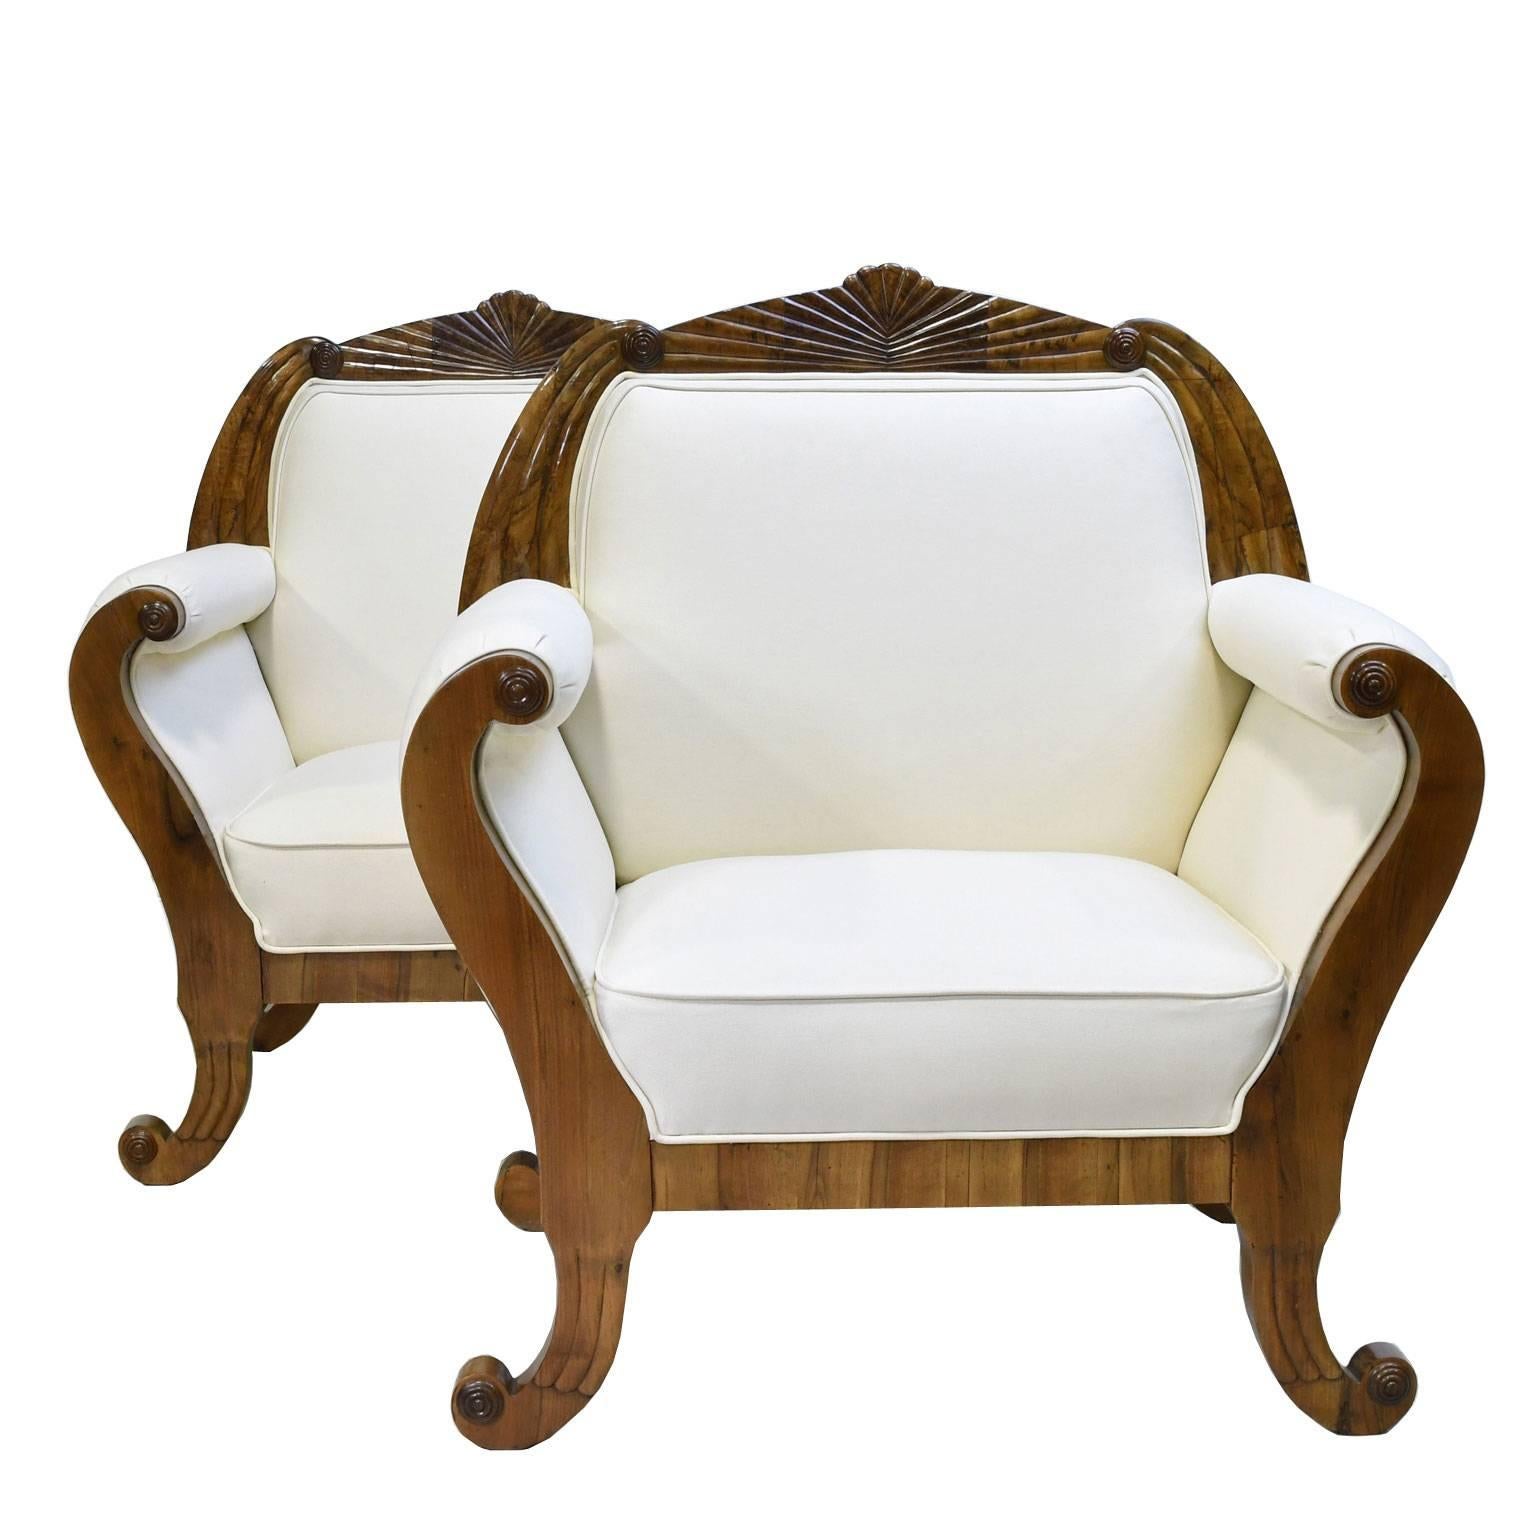 A very beautiful South German Biedermeier suite in fine walnut consisting of a sofa and a pair of armchairs/ bergères, each with shaped, fan-carved crest rail above scrolled armrests terminating in out-scrolled feet, Germany, circa 1830.
Note: Our